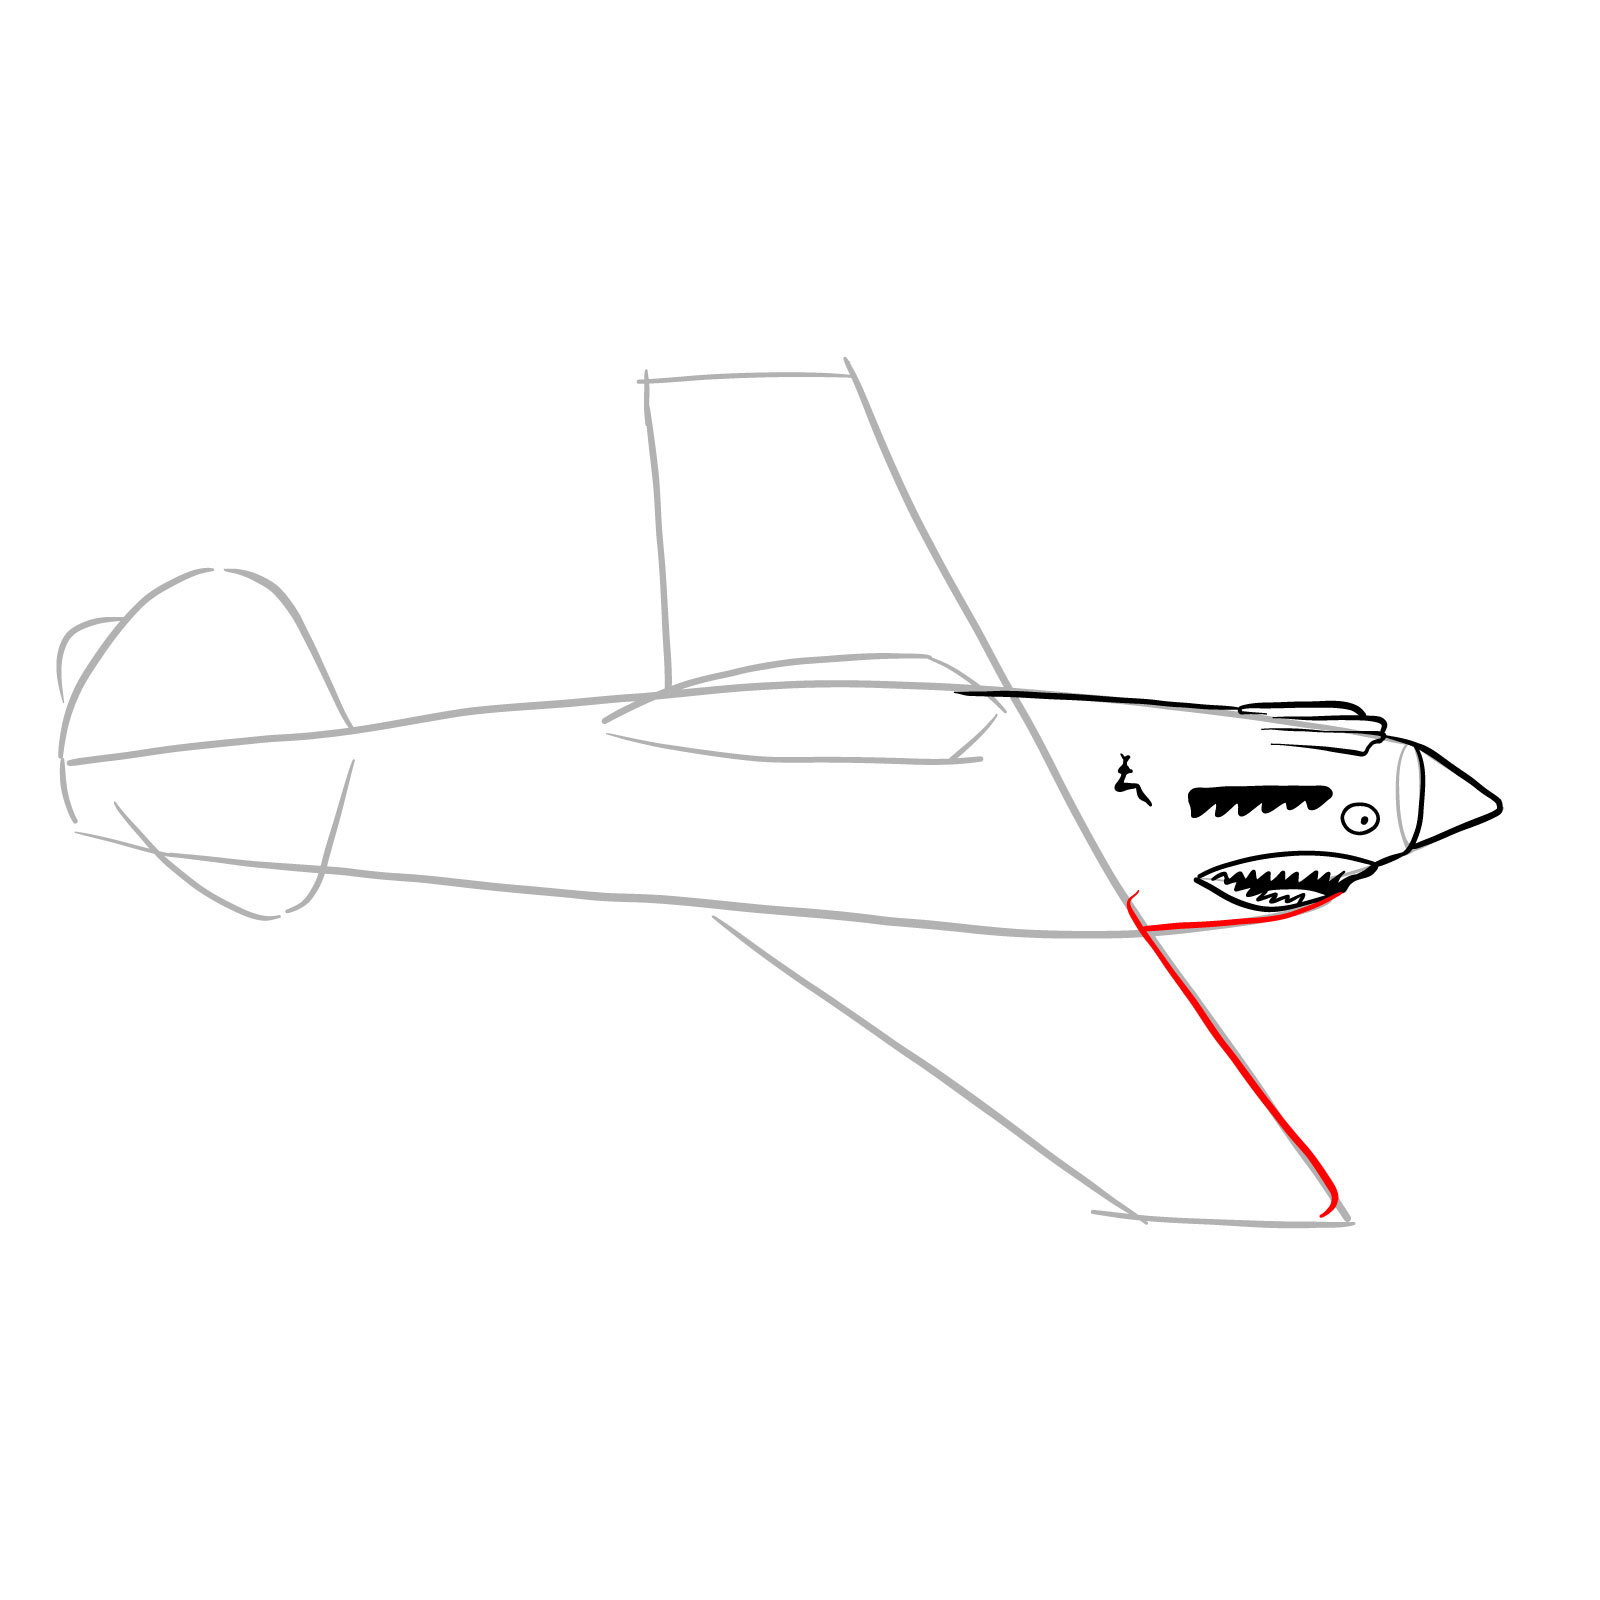 How to draw a P-40 Flying Tiger - step 11